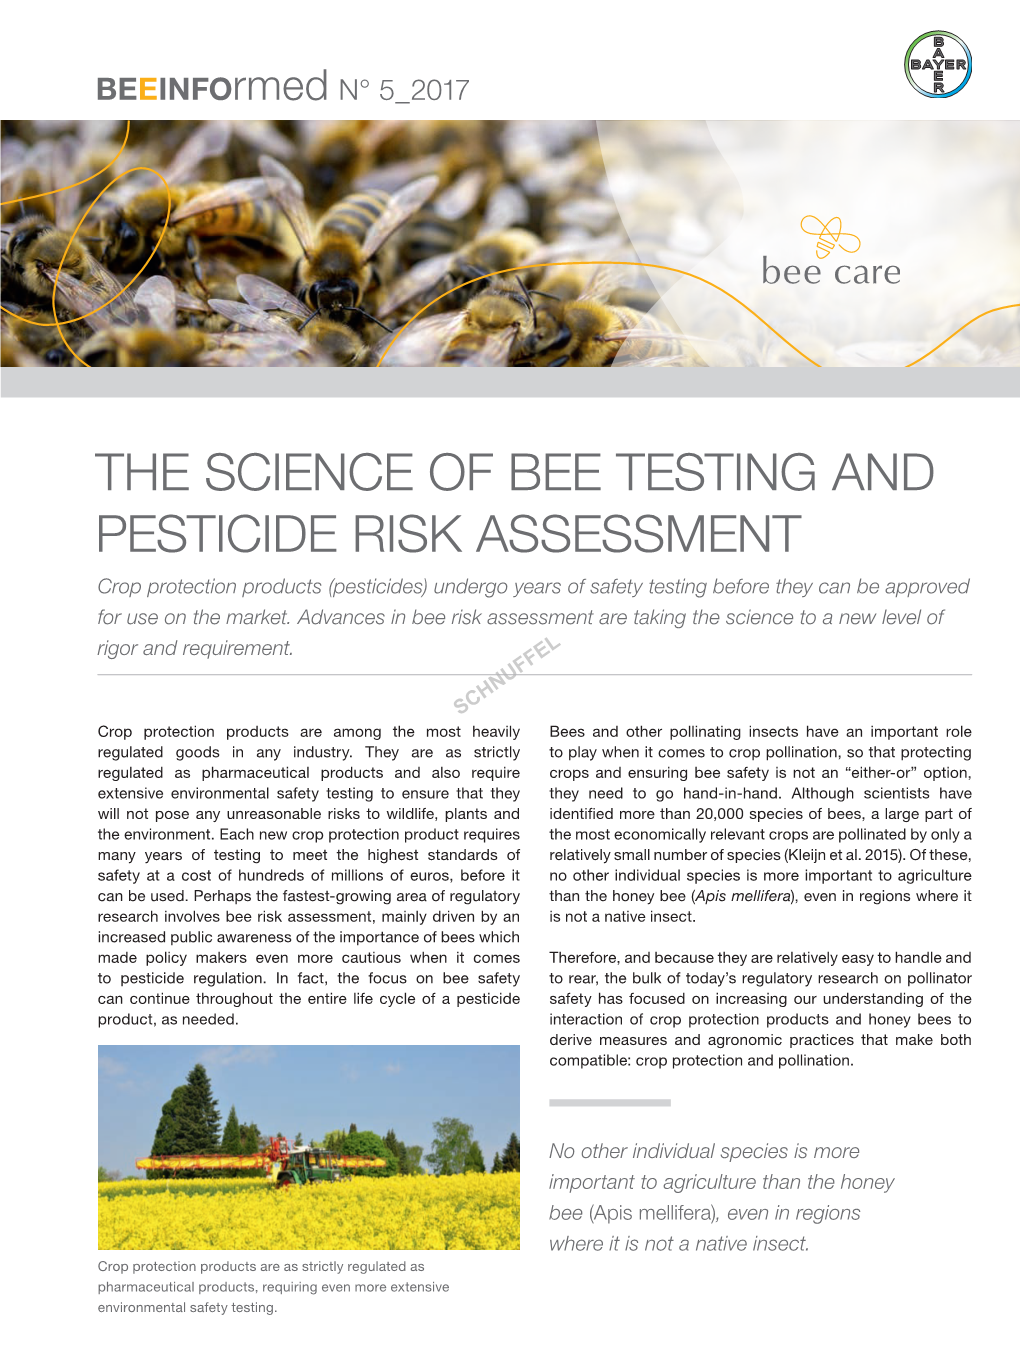 The Science of Bee Testing and Pesticide Risk